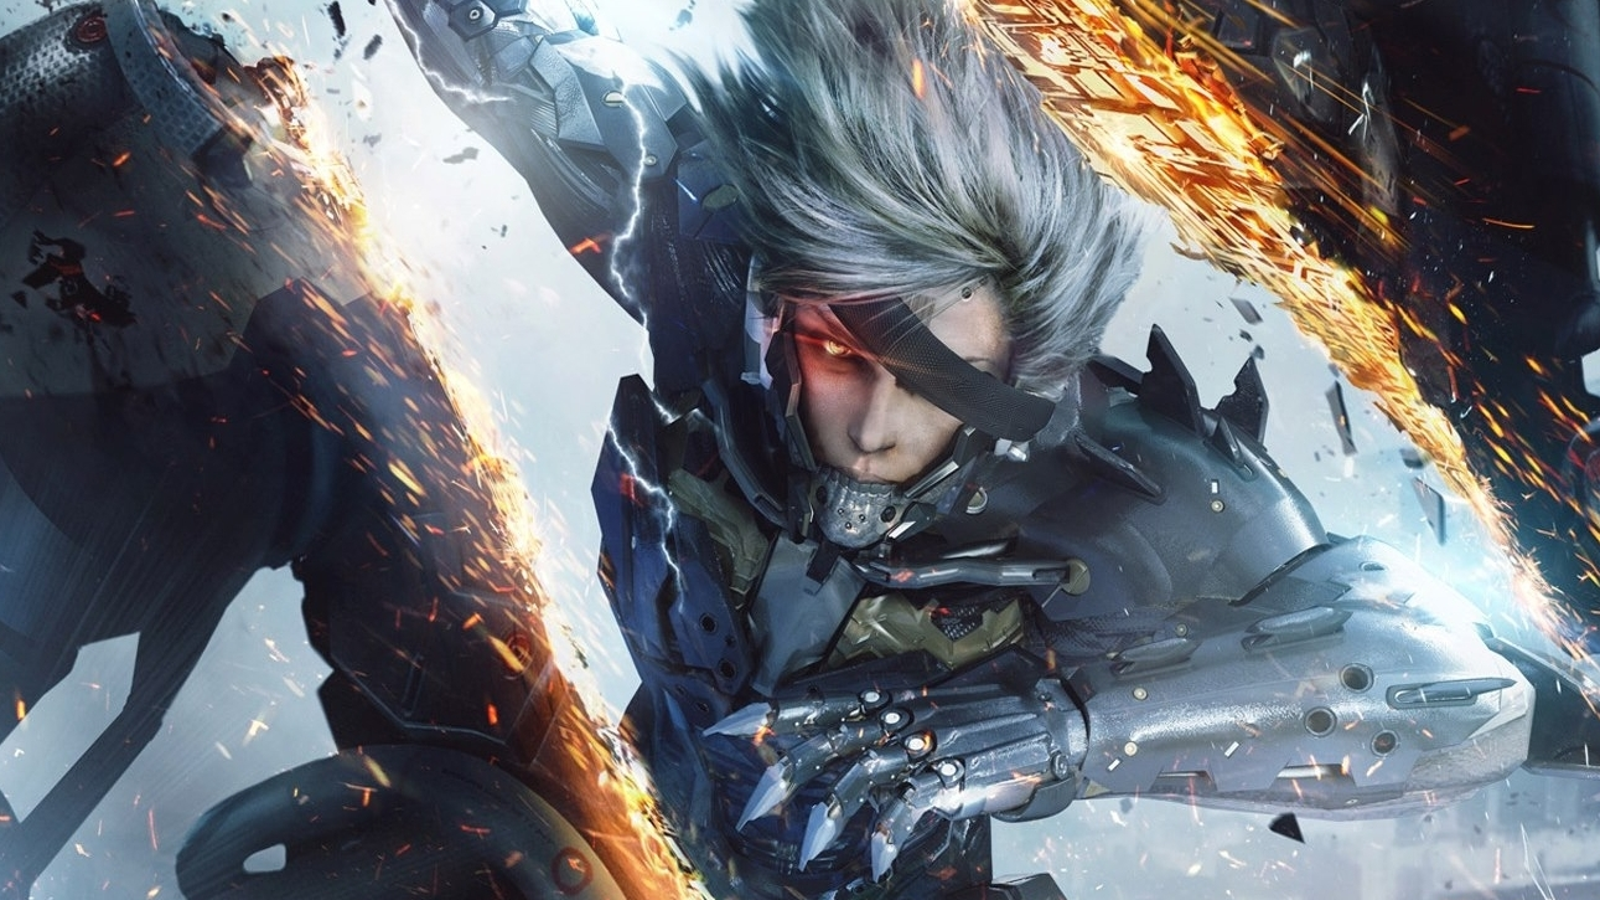 Xbox Games With Gold Delivers Metal Gear Rising and Garden Warfare